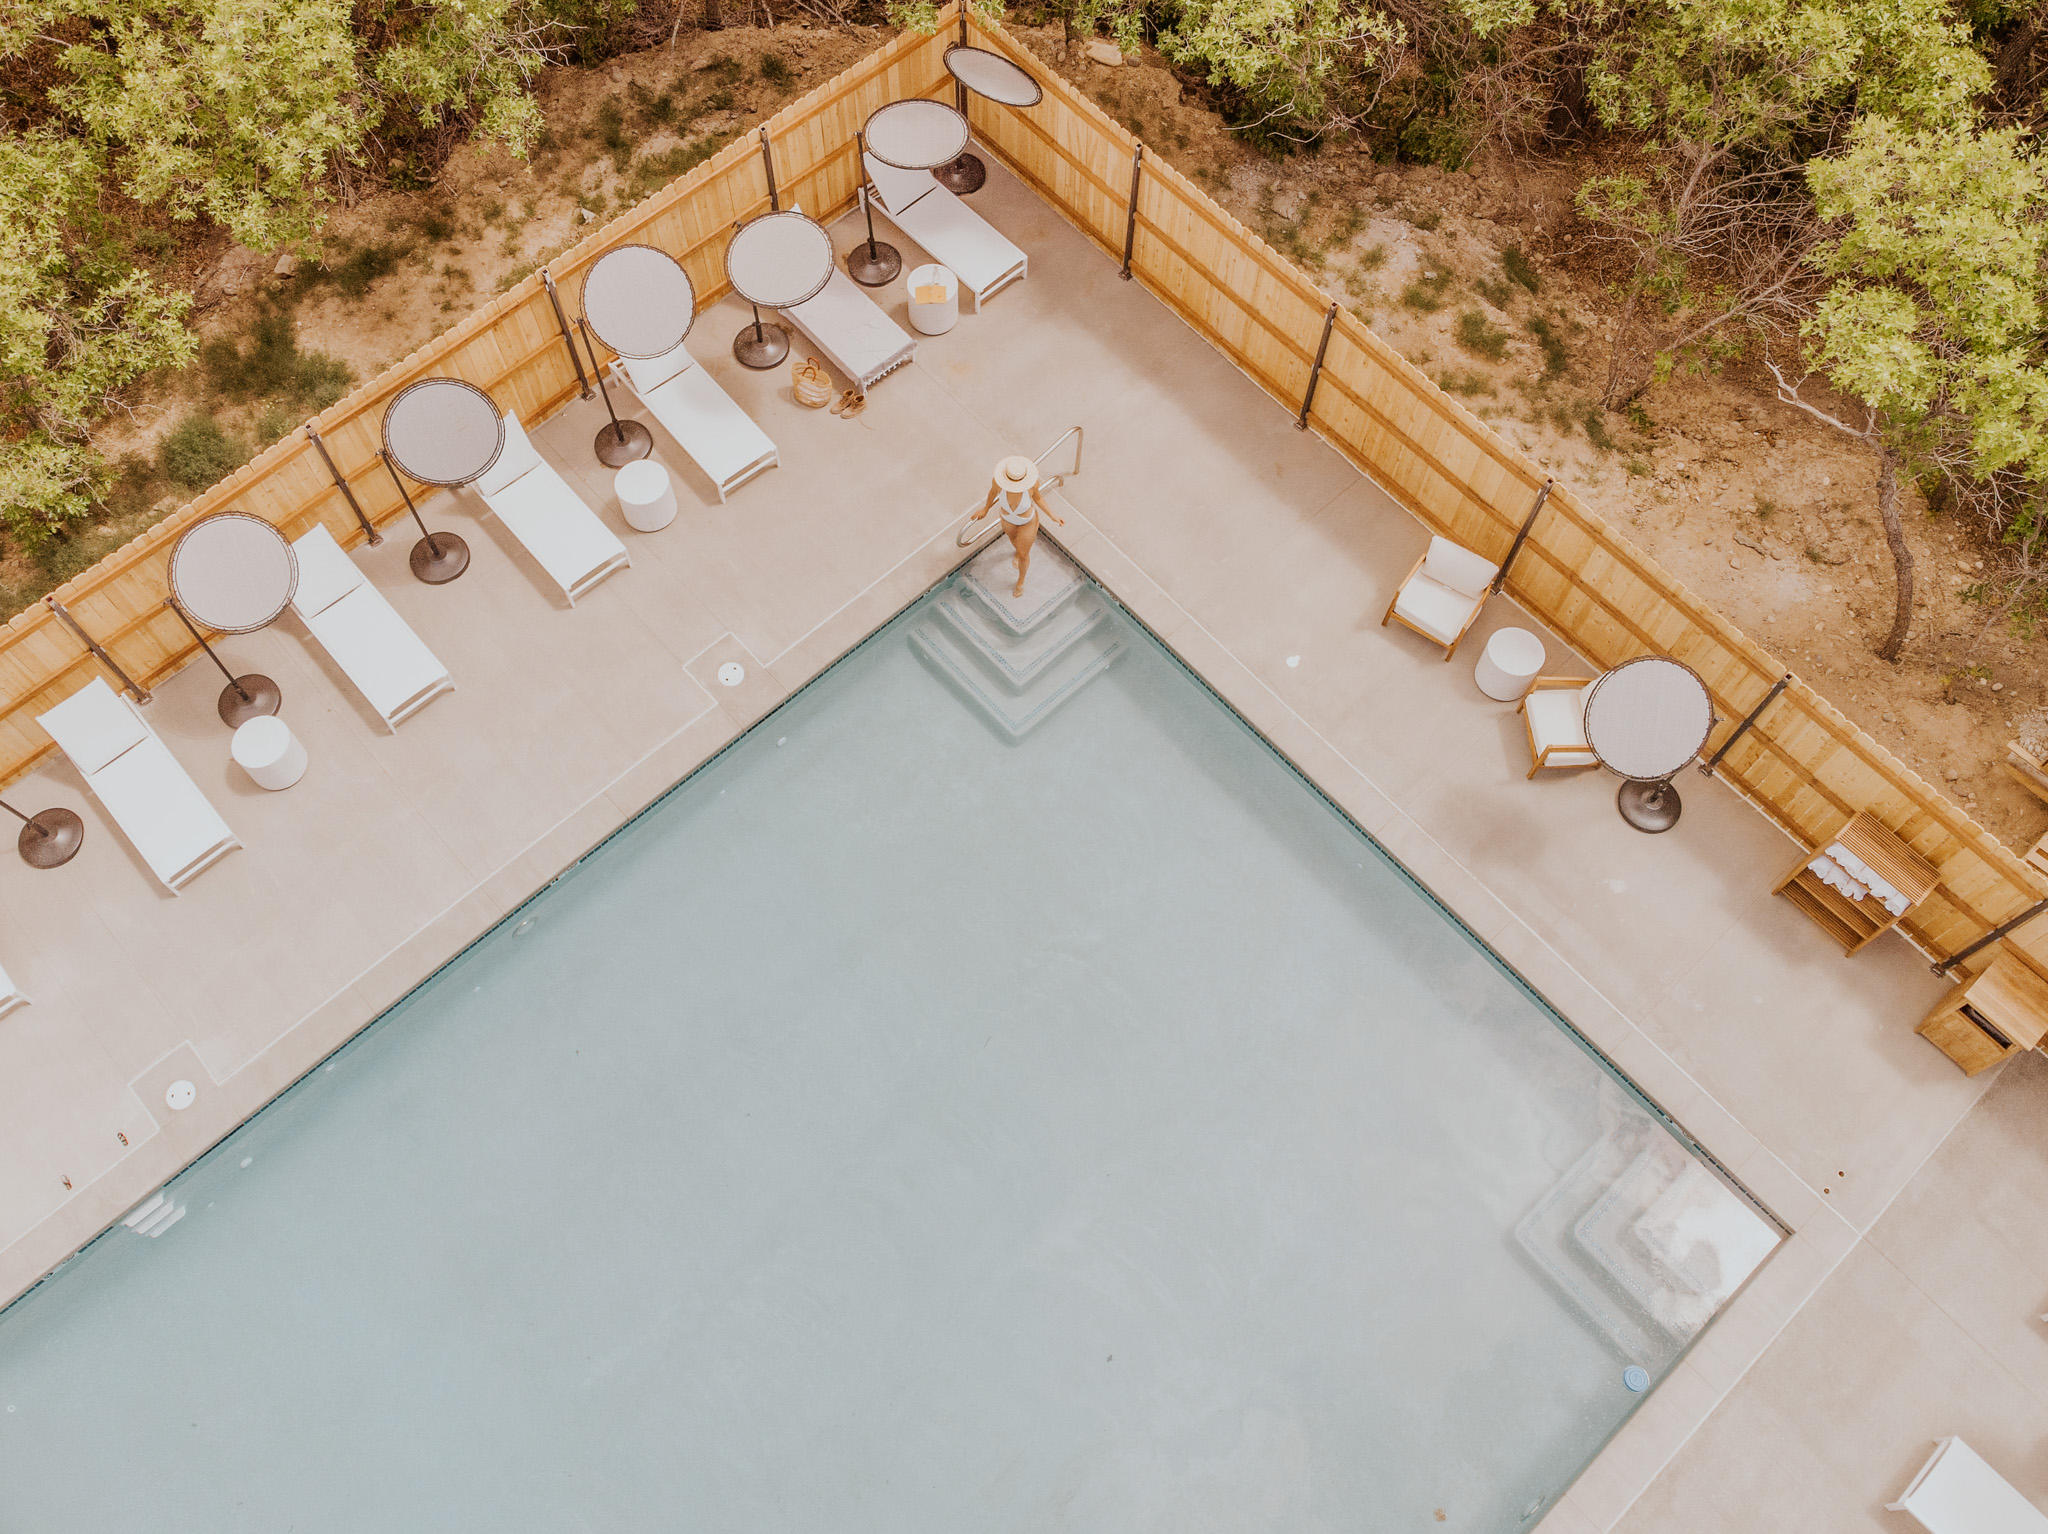 Yonder Escalante Pool and Hot Tub Now Open